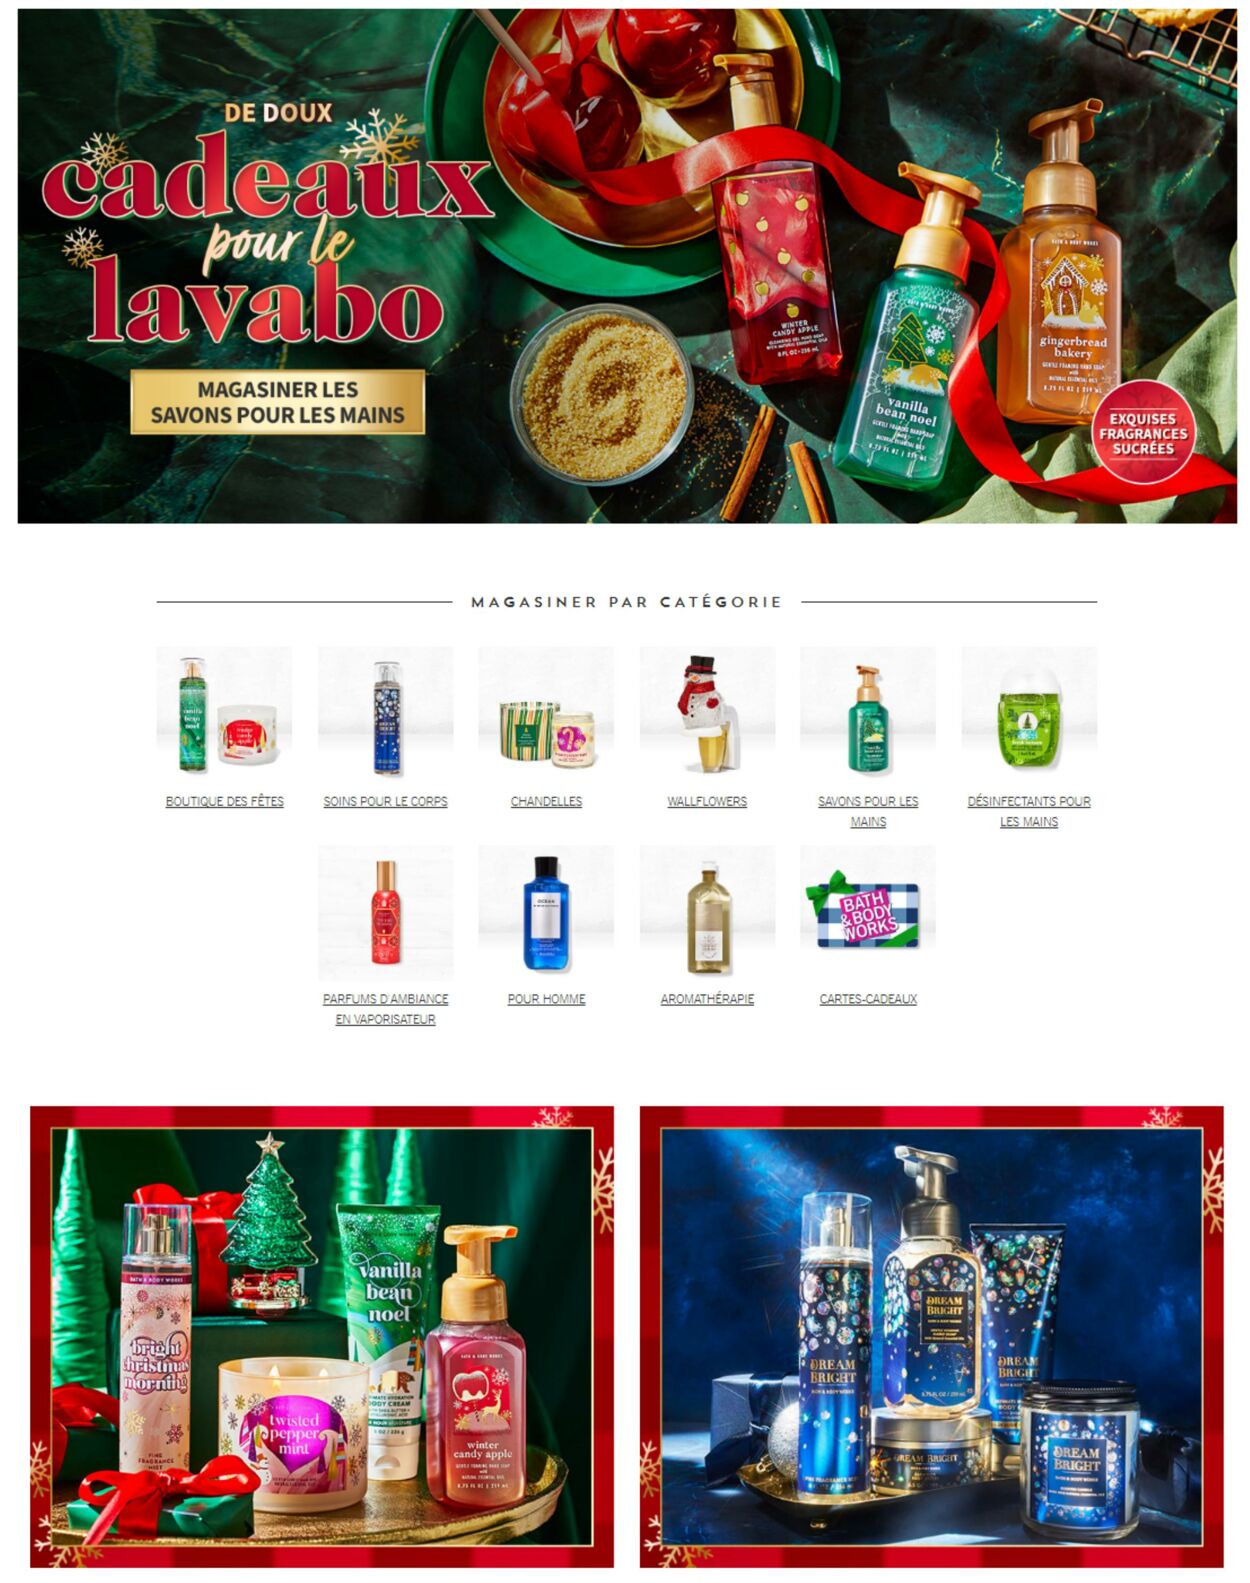 Circulaire Bath & Body Works 07.03.2023 - 20.03.2023